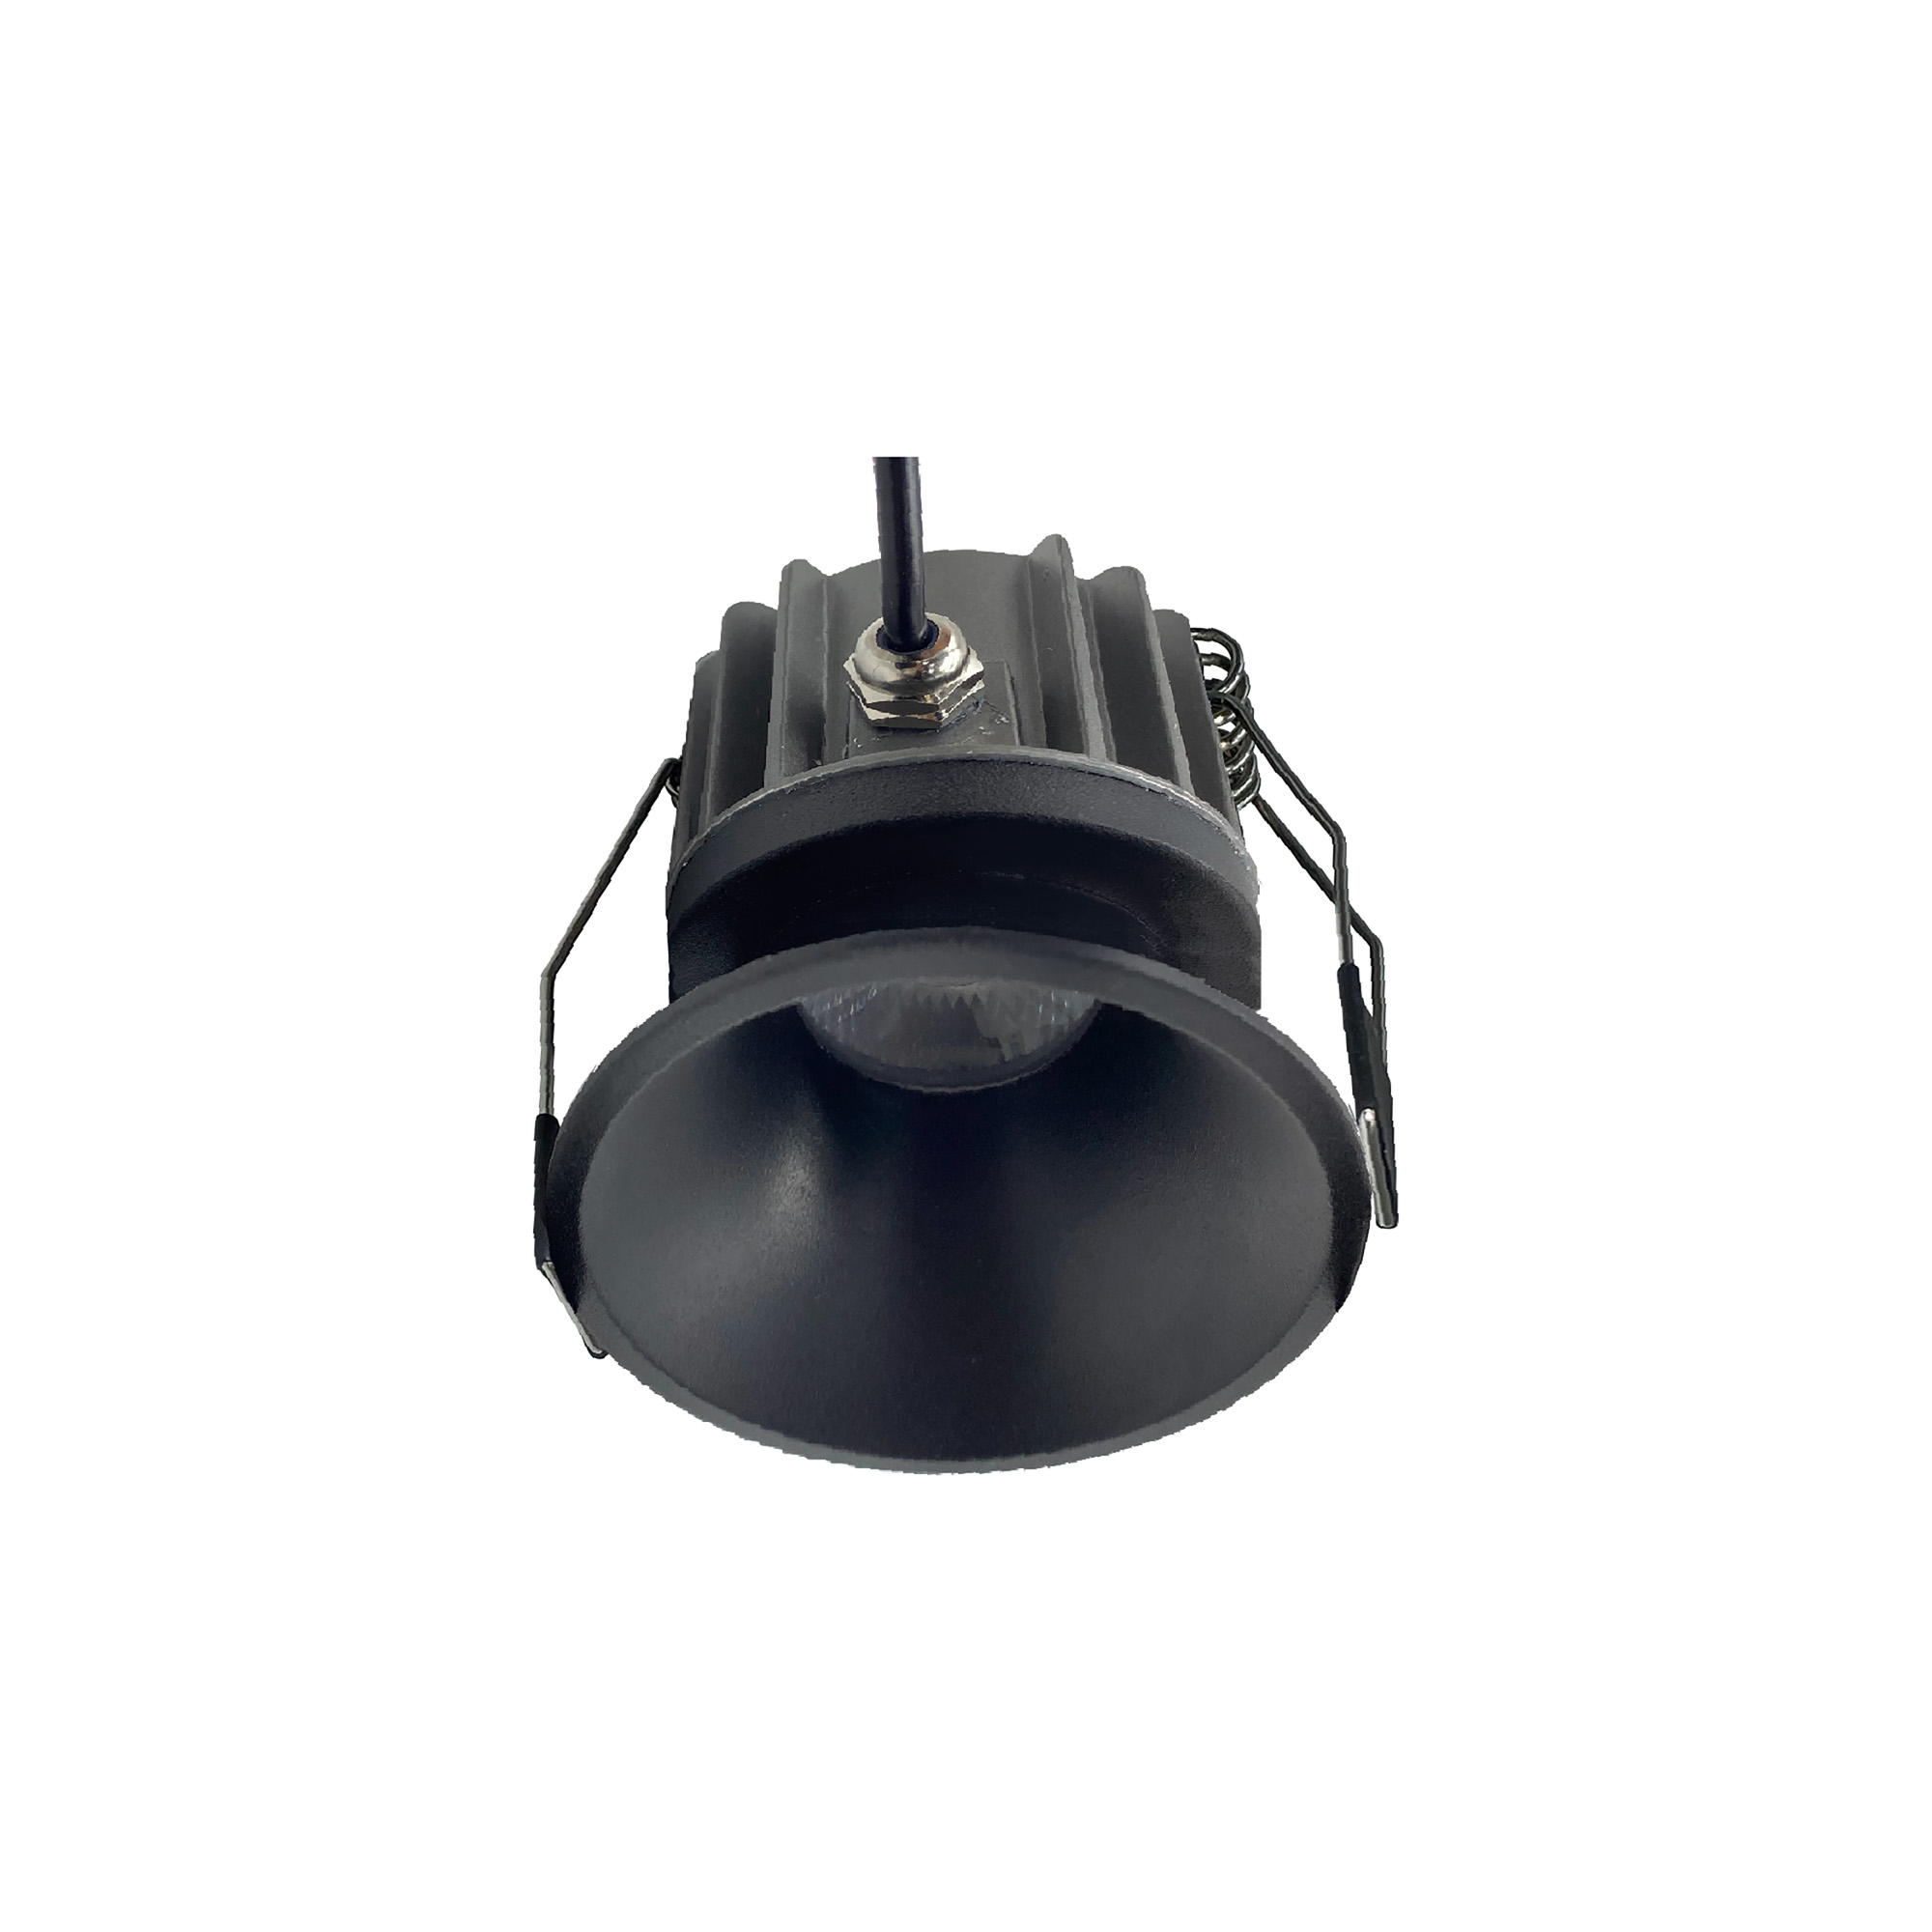 M8765  Rombok Downlight 8W LED, Dimmable CCT LED, Cut Out: 55mm, 720lm, 36° Deg, IP65 DRIVER INC., Black